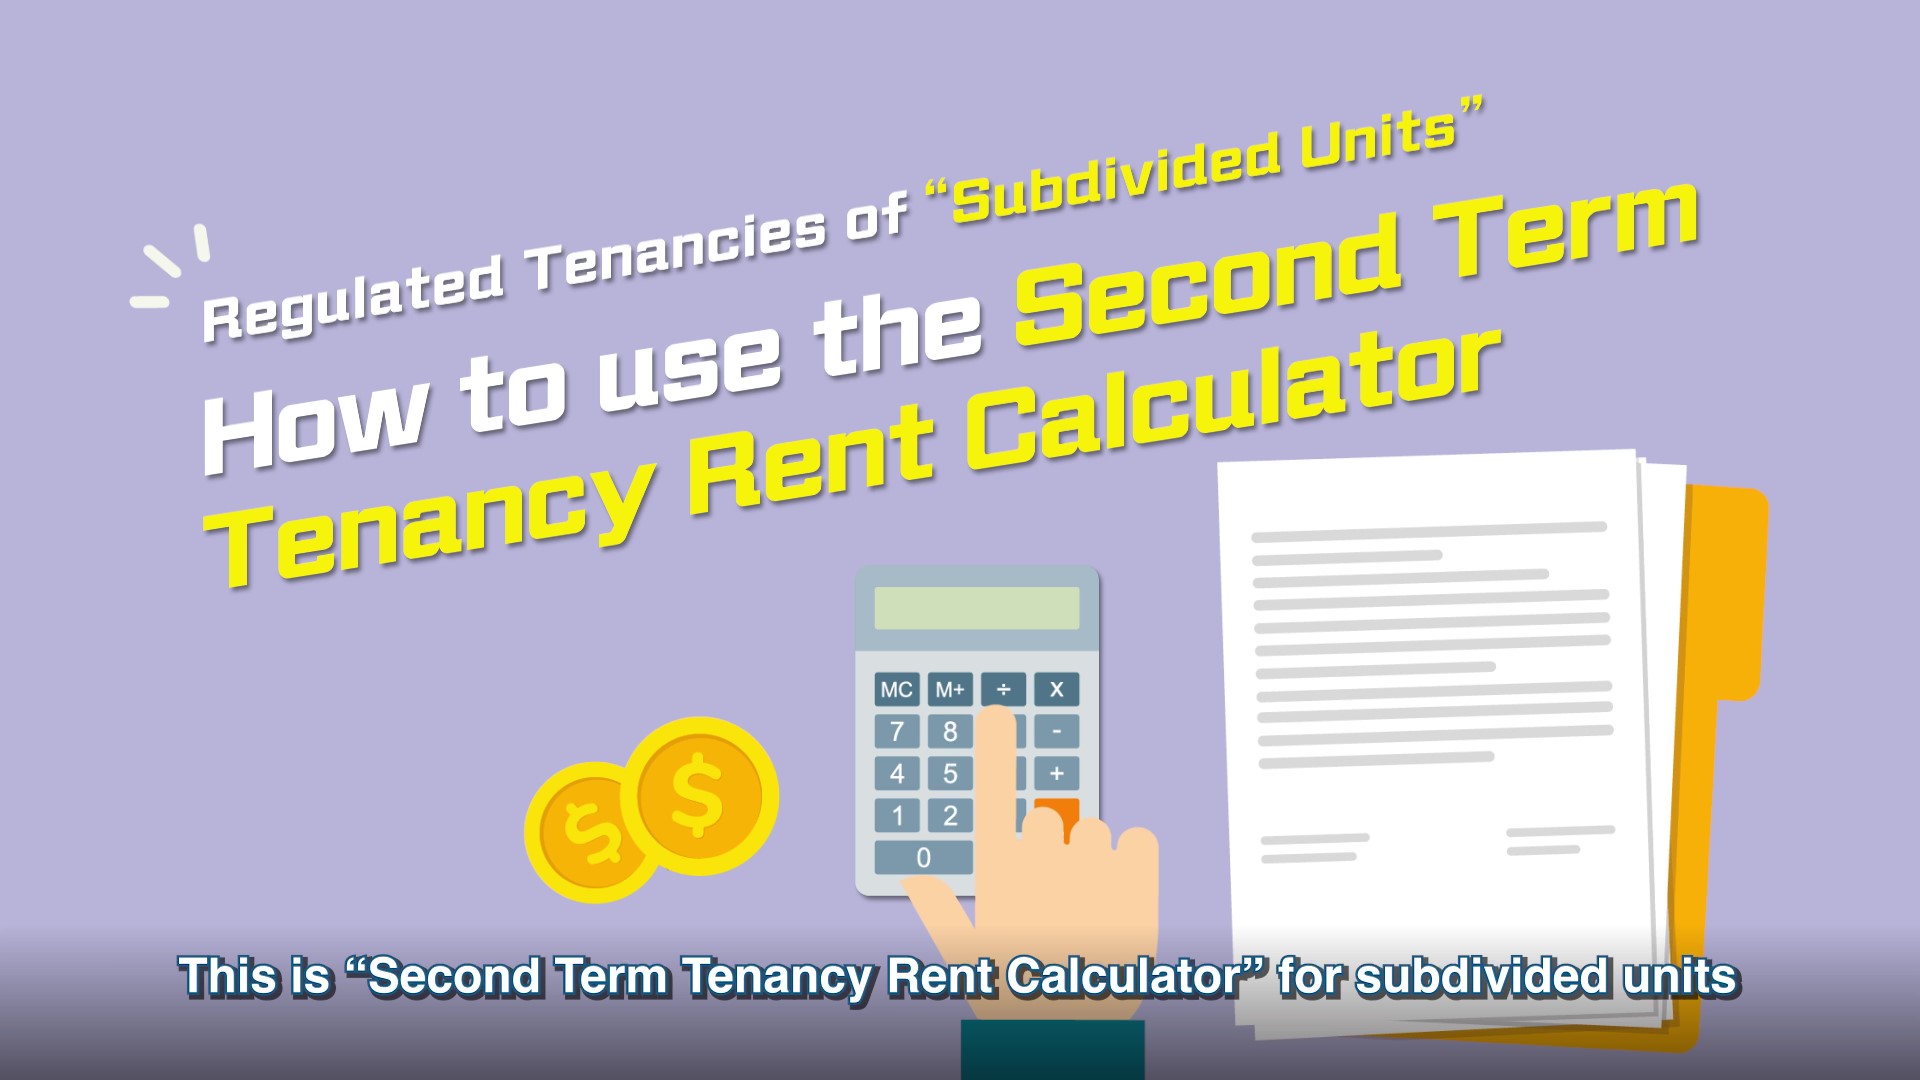 Tutorial video – Regulated Tenancies of Subdivided Units - How to use the Second Term Tenancy Rent Calculator